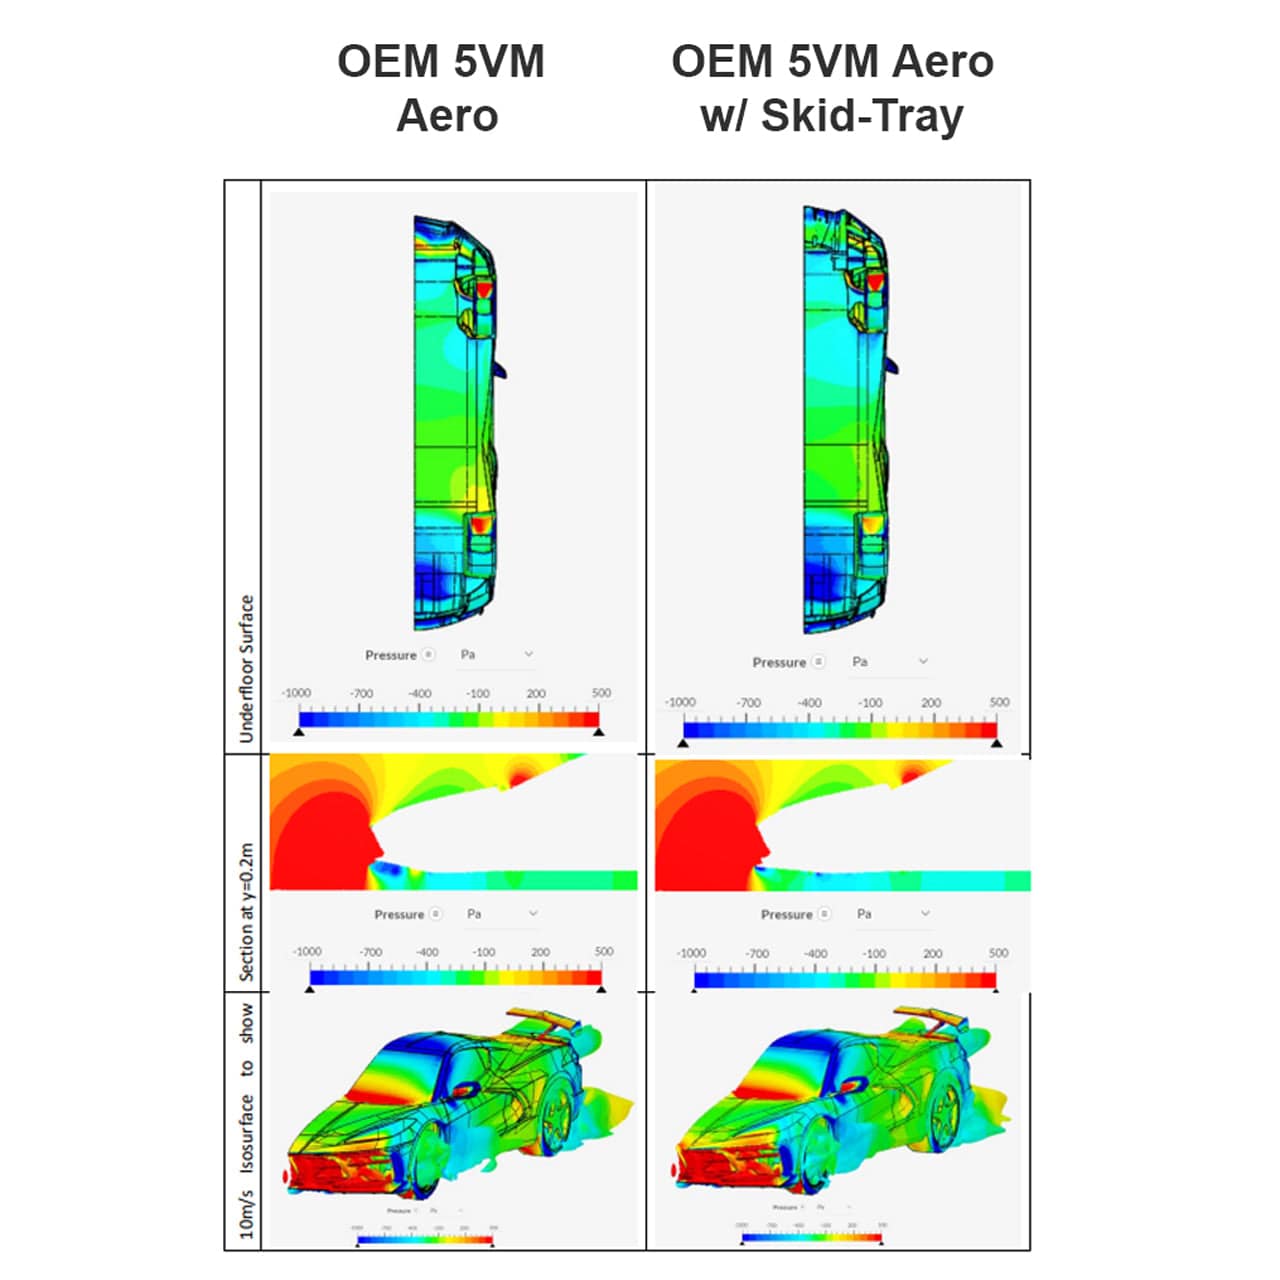 CFD analysis of the ACS C8 Stingray Undertray showing lowered pressured with the undertray